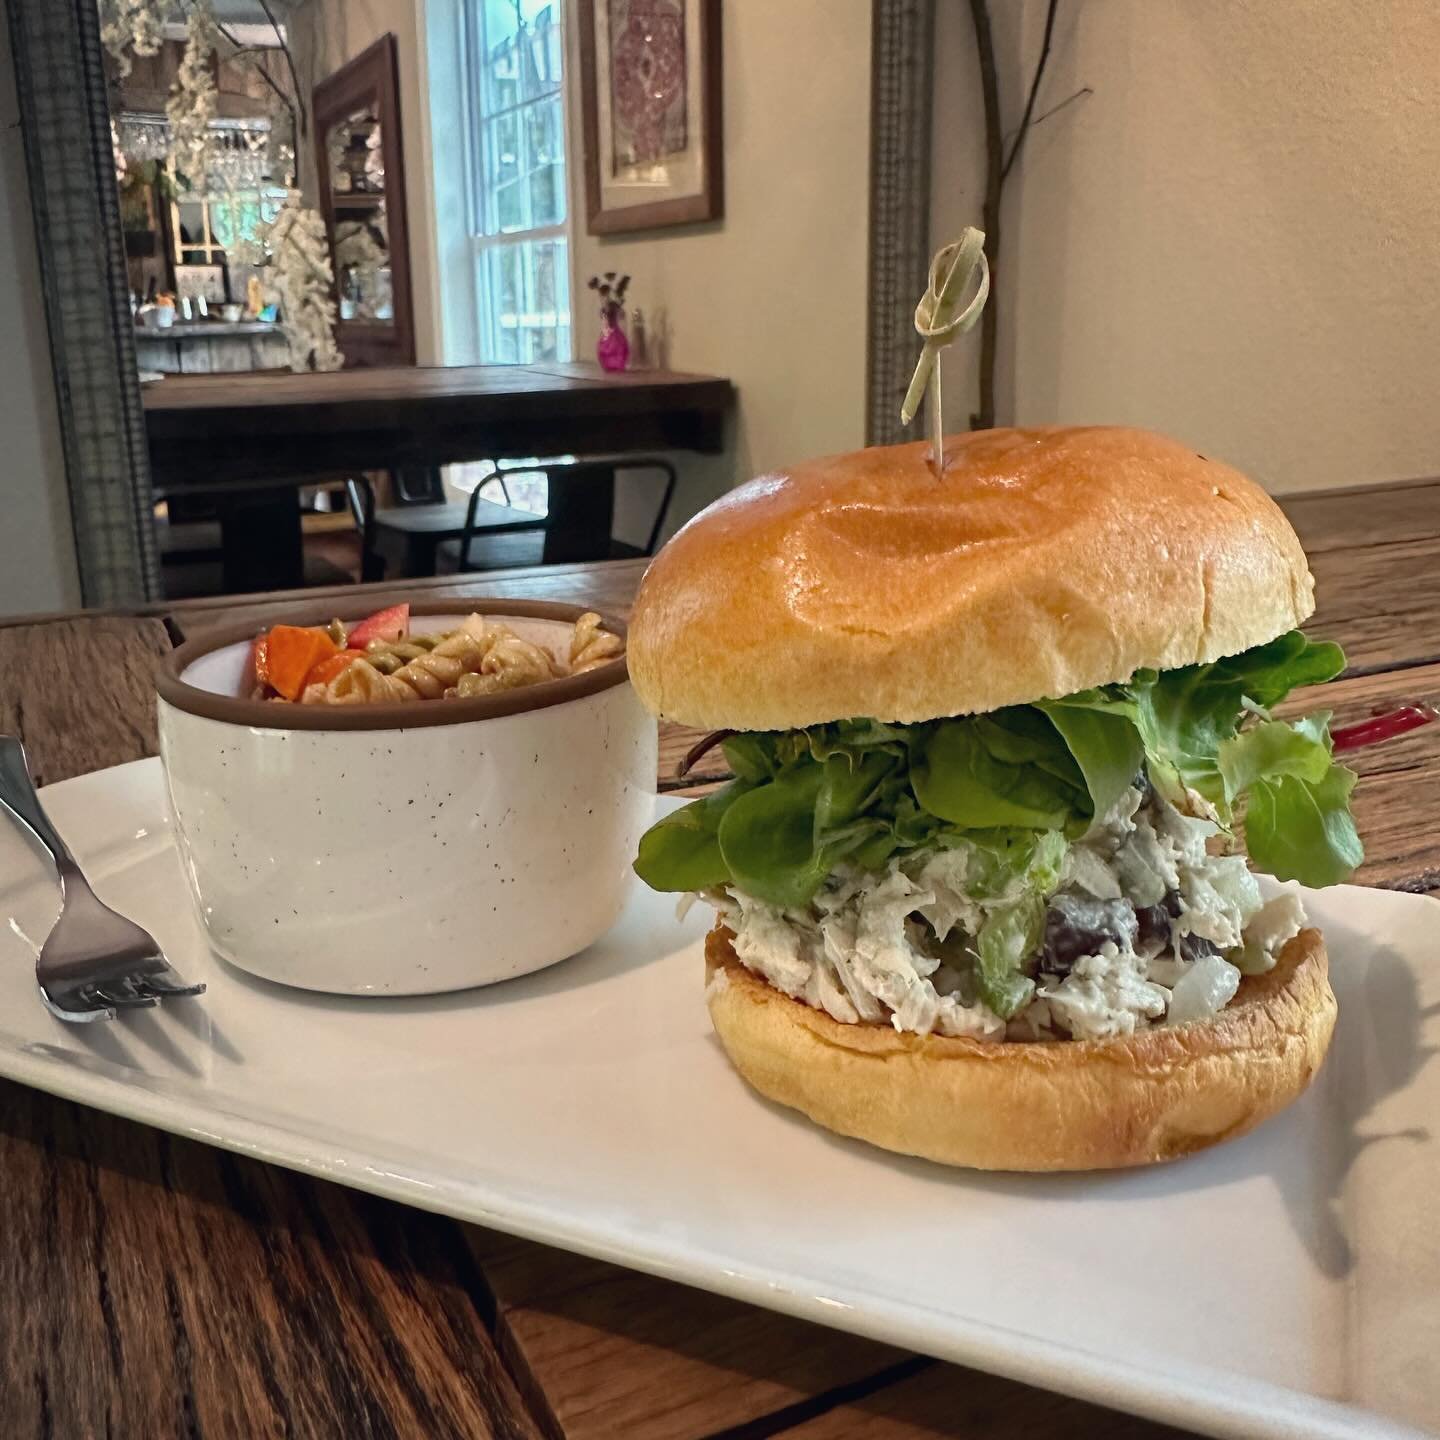 One of our top sellers this weekend was our brand new Chicken Salad Sandwich! We love this tasty new addition to the menu, available at The Hatchling Coffee House Monday, Tuesday and Friday 9am-2pm and all weekend long! (Fridays until 9, Saturdays 11